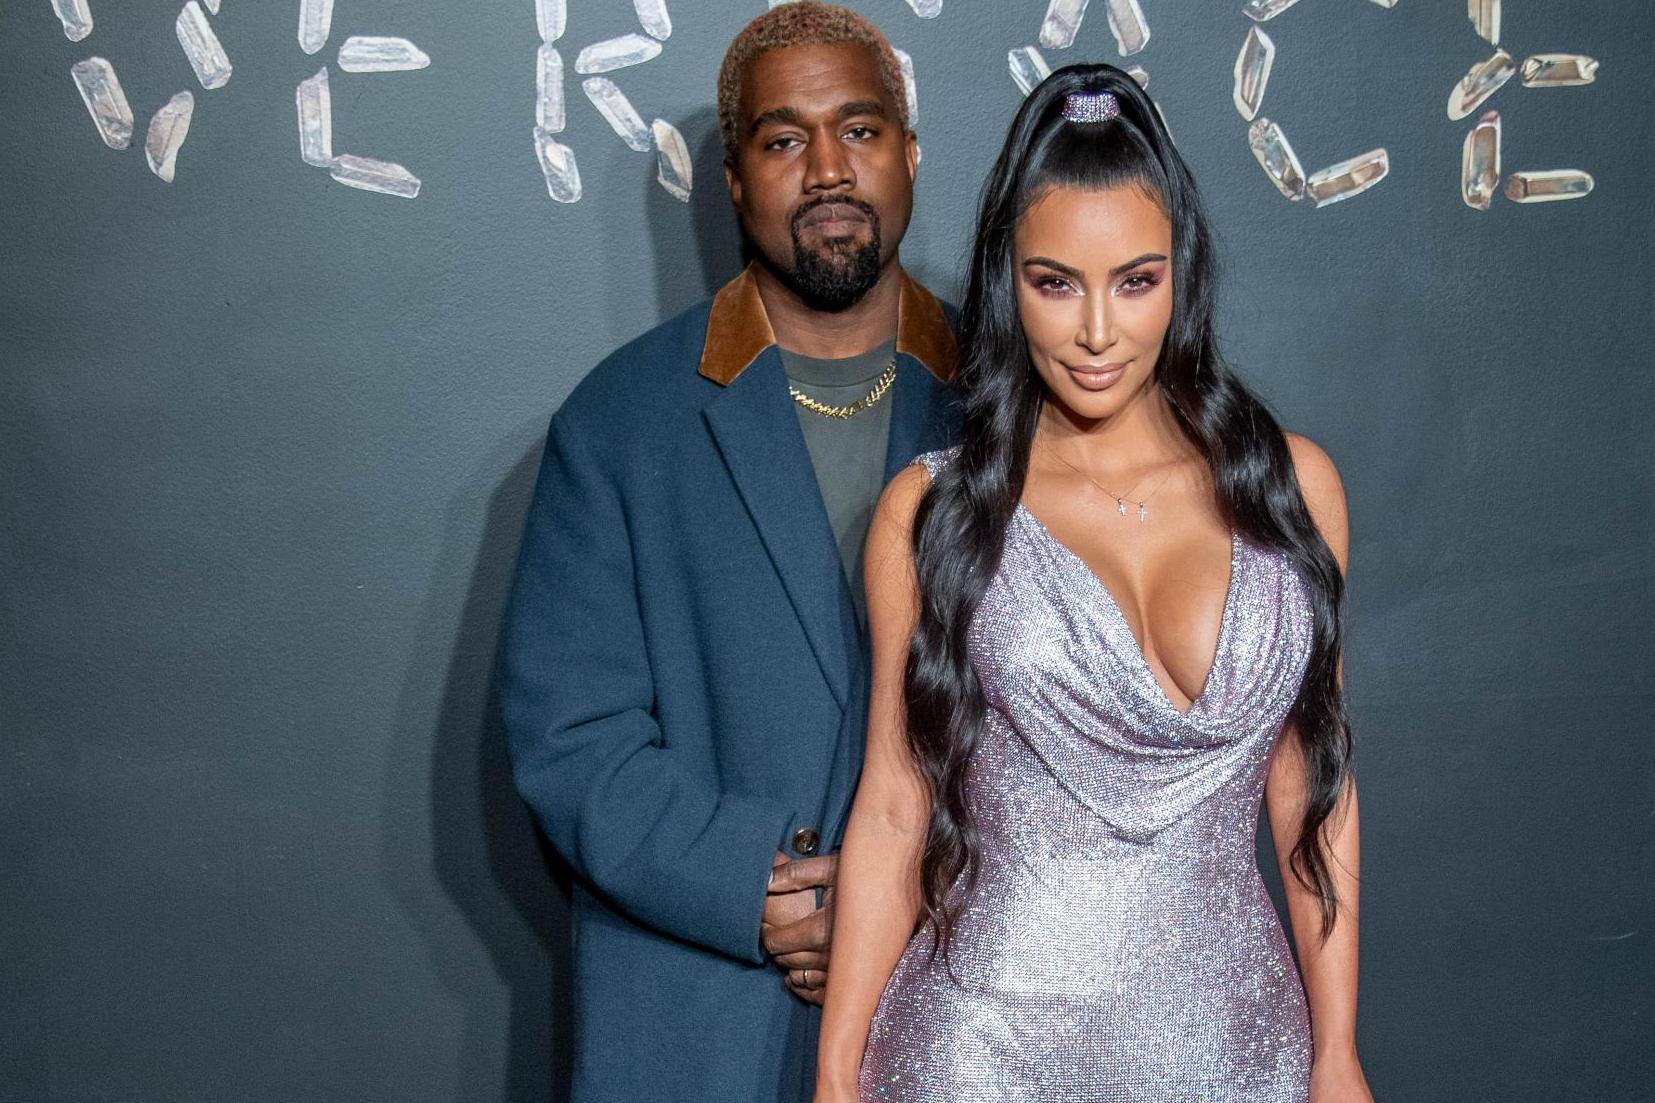 Kim Kardashian says Kanye West has banned North from wearing makeup (Getty)